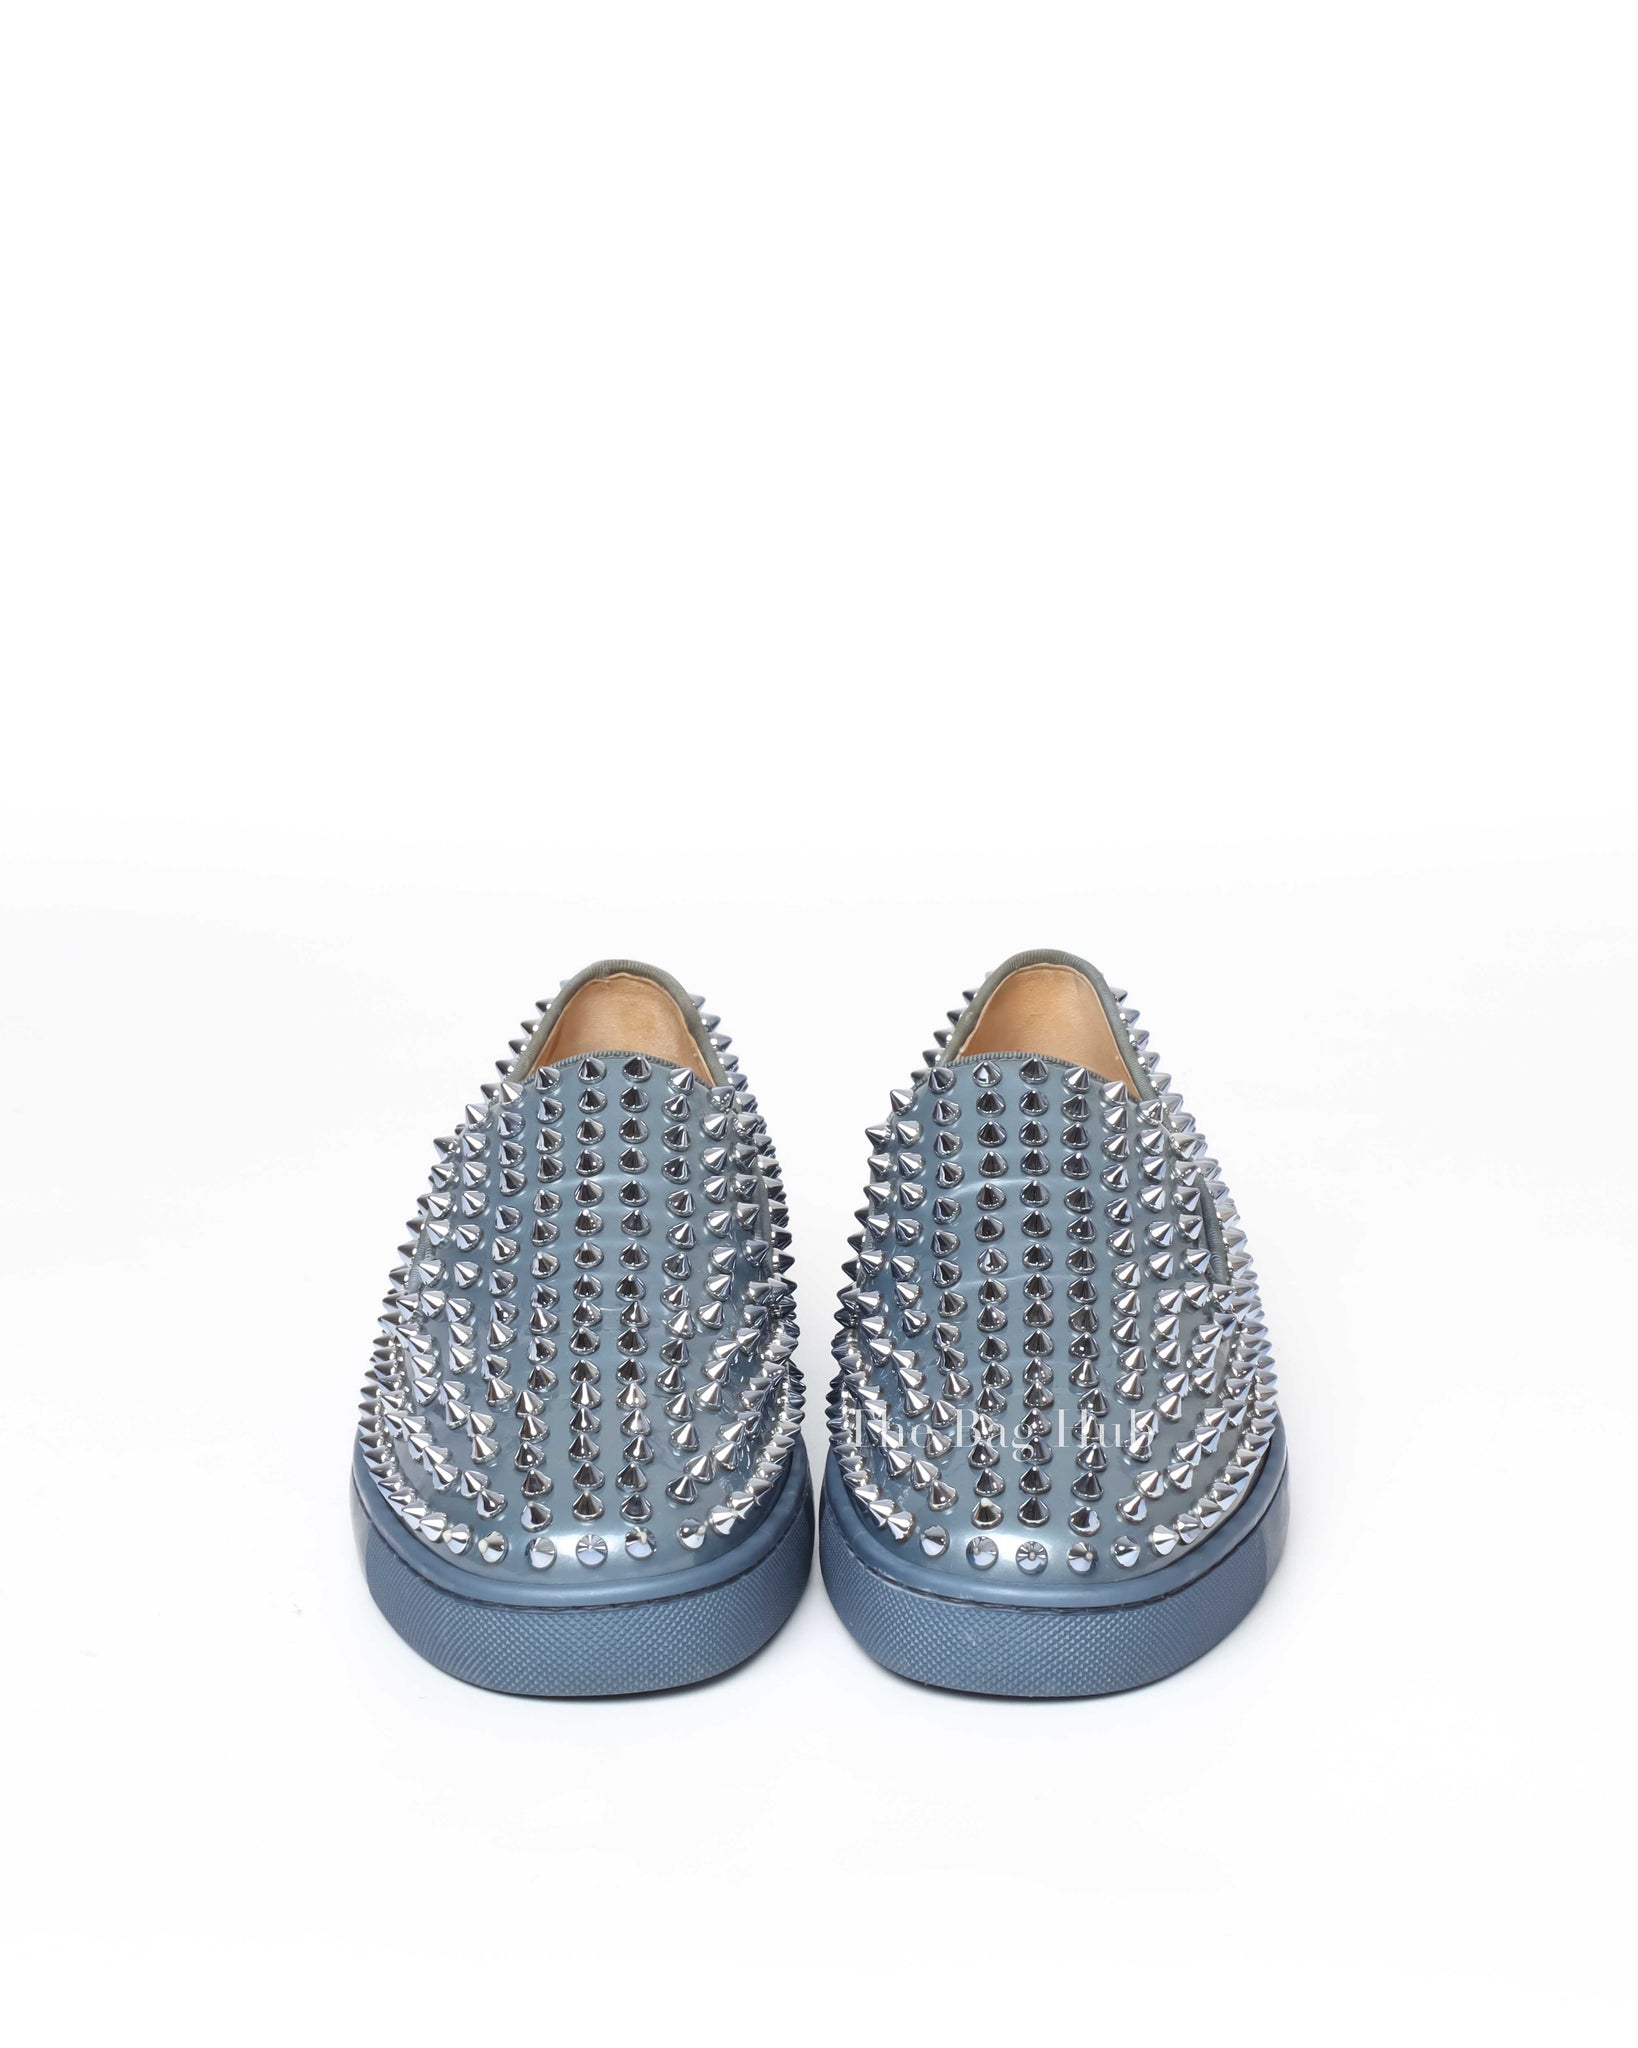 Christian Louboutin Bluish Silver Patent Roller Boat Spike Slip-On Sneakers Size 40-3